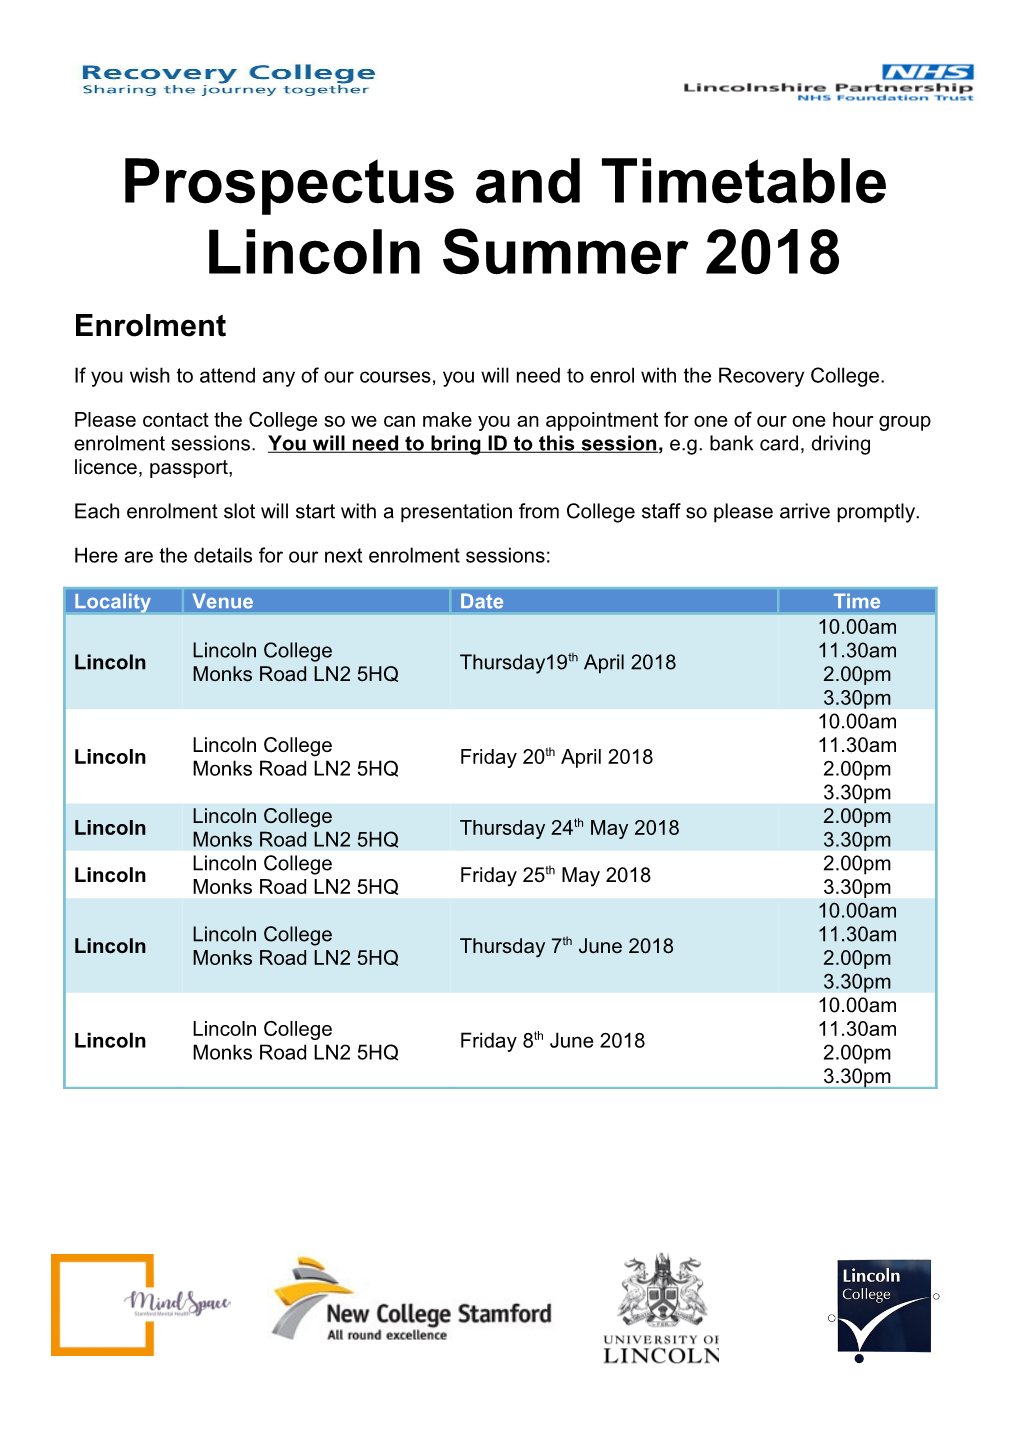 Prospectus and Timetable Lincoln Summer 2018